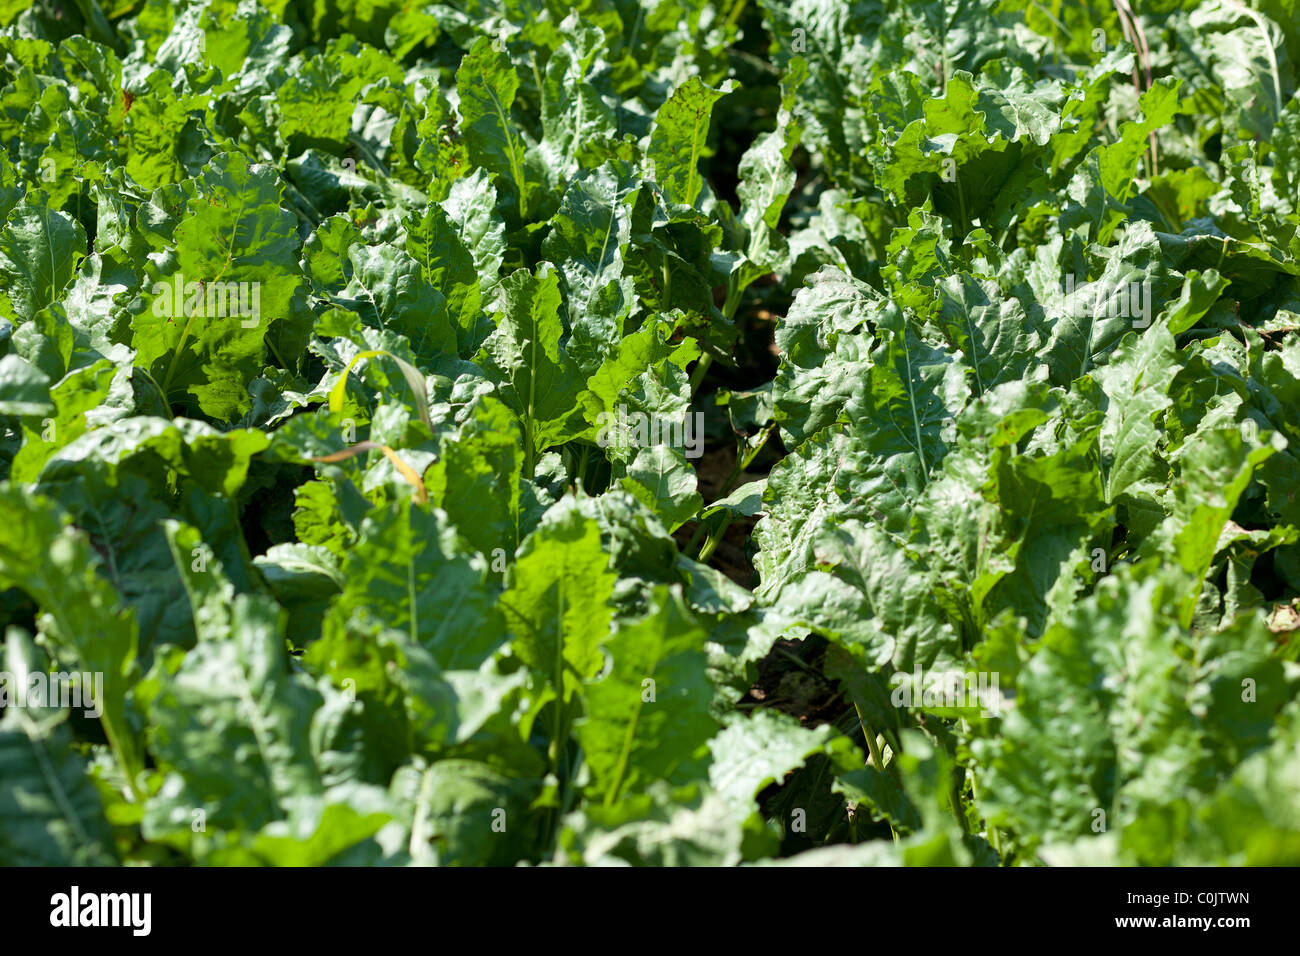 Agriculture agricultural field Sugar beet beetroot Stock Photo